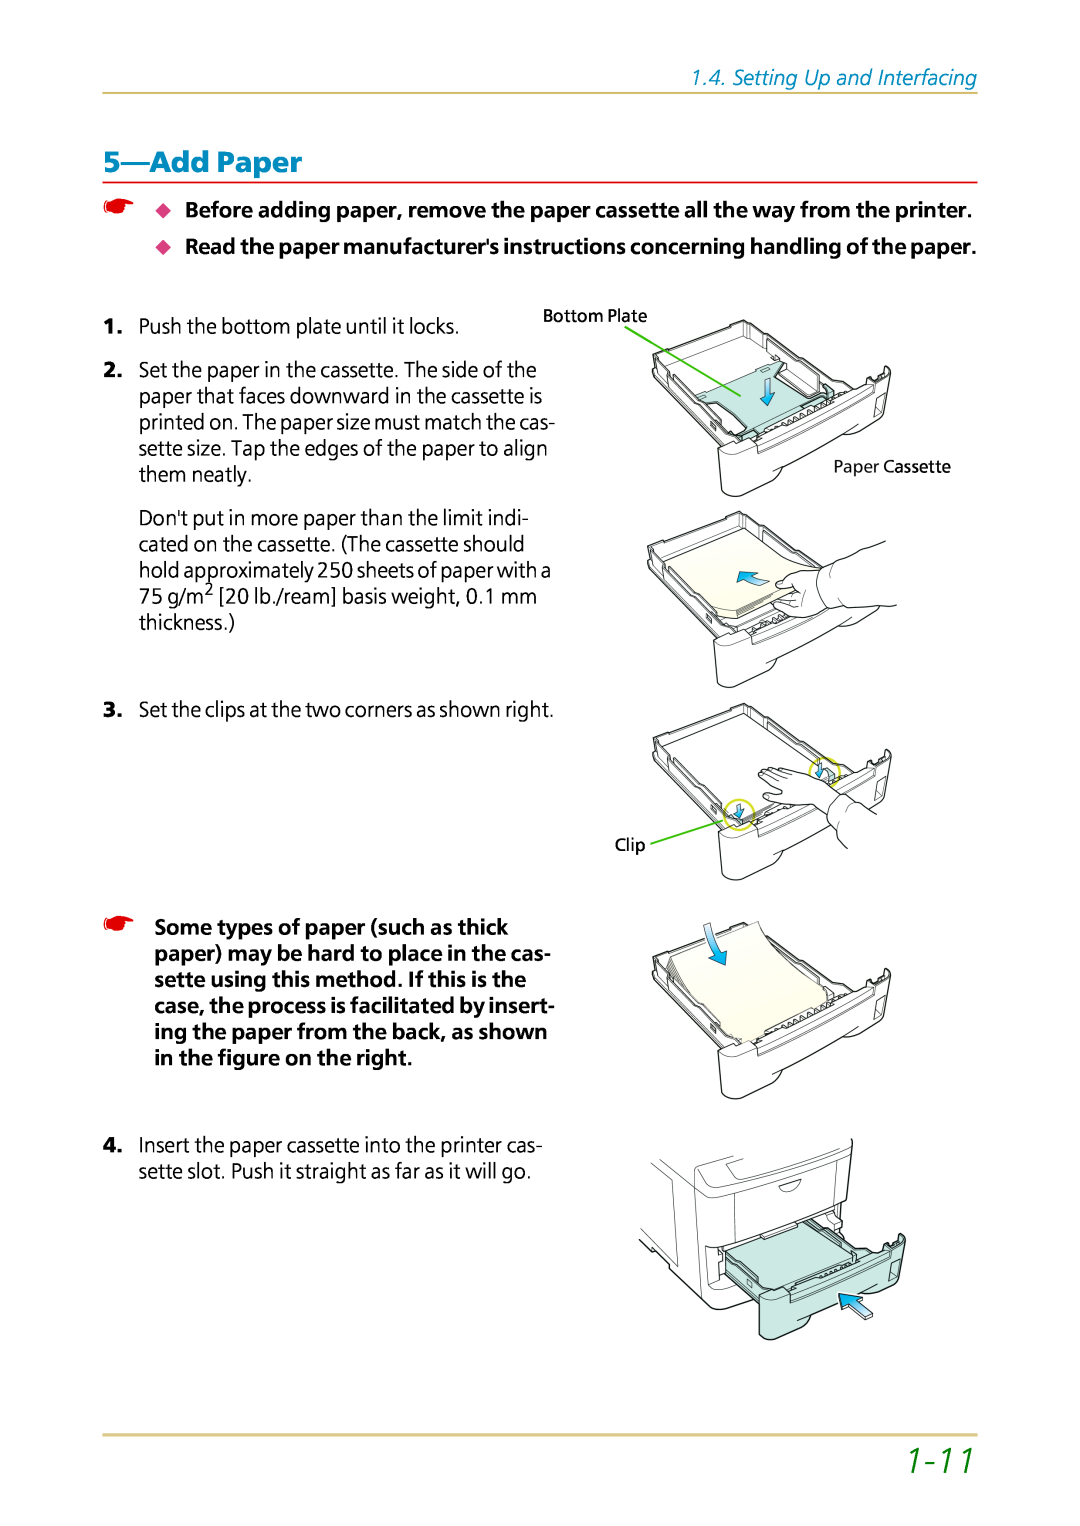 Kyocera FS-1700 user manual 1-11, 5—AddPaper, Setting Up and Interfacing, Push the bottom plate until it locks, them neatly 